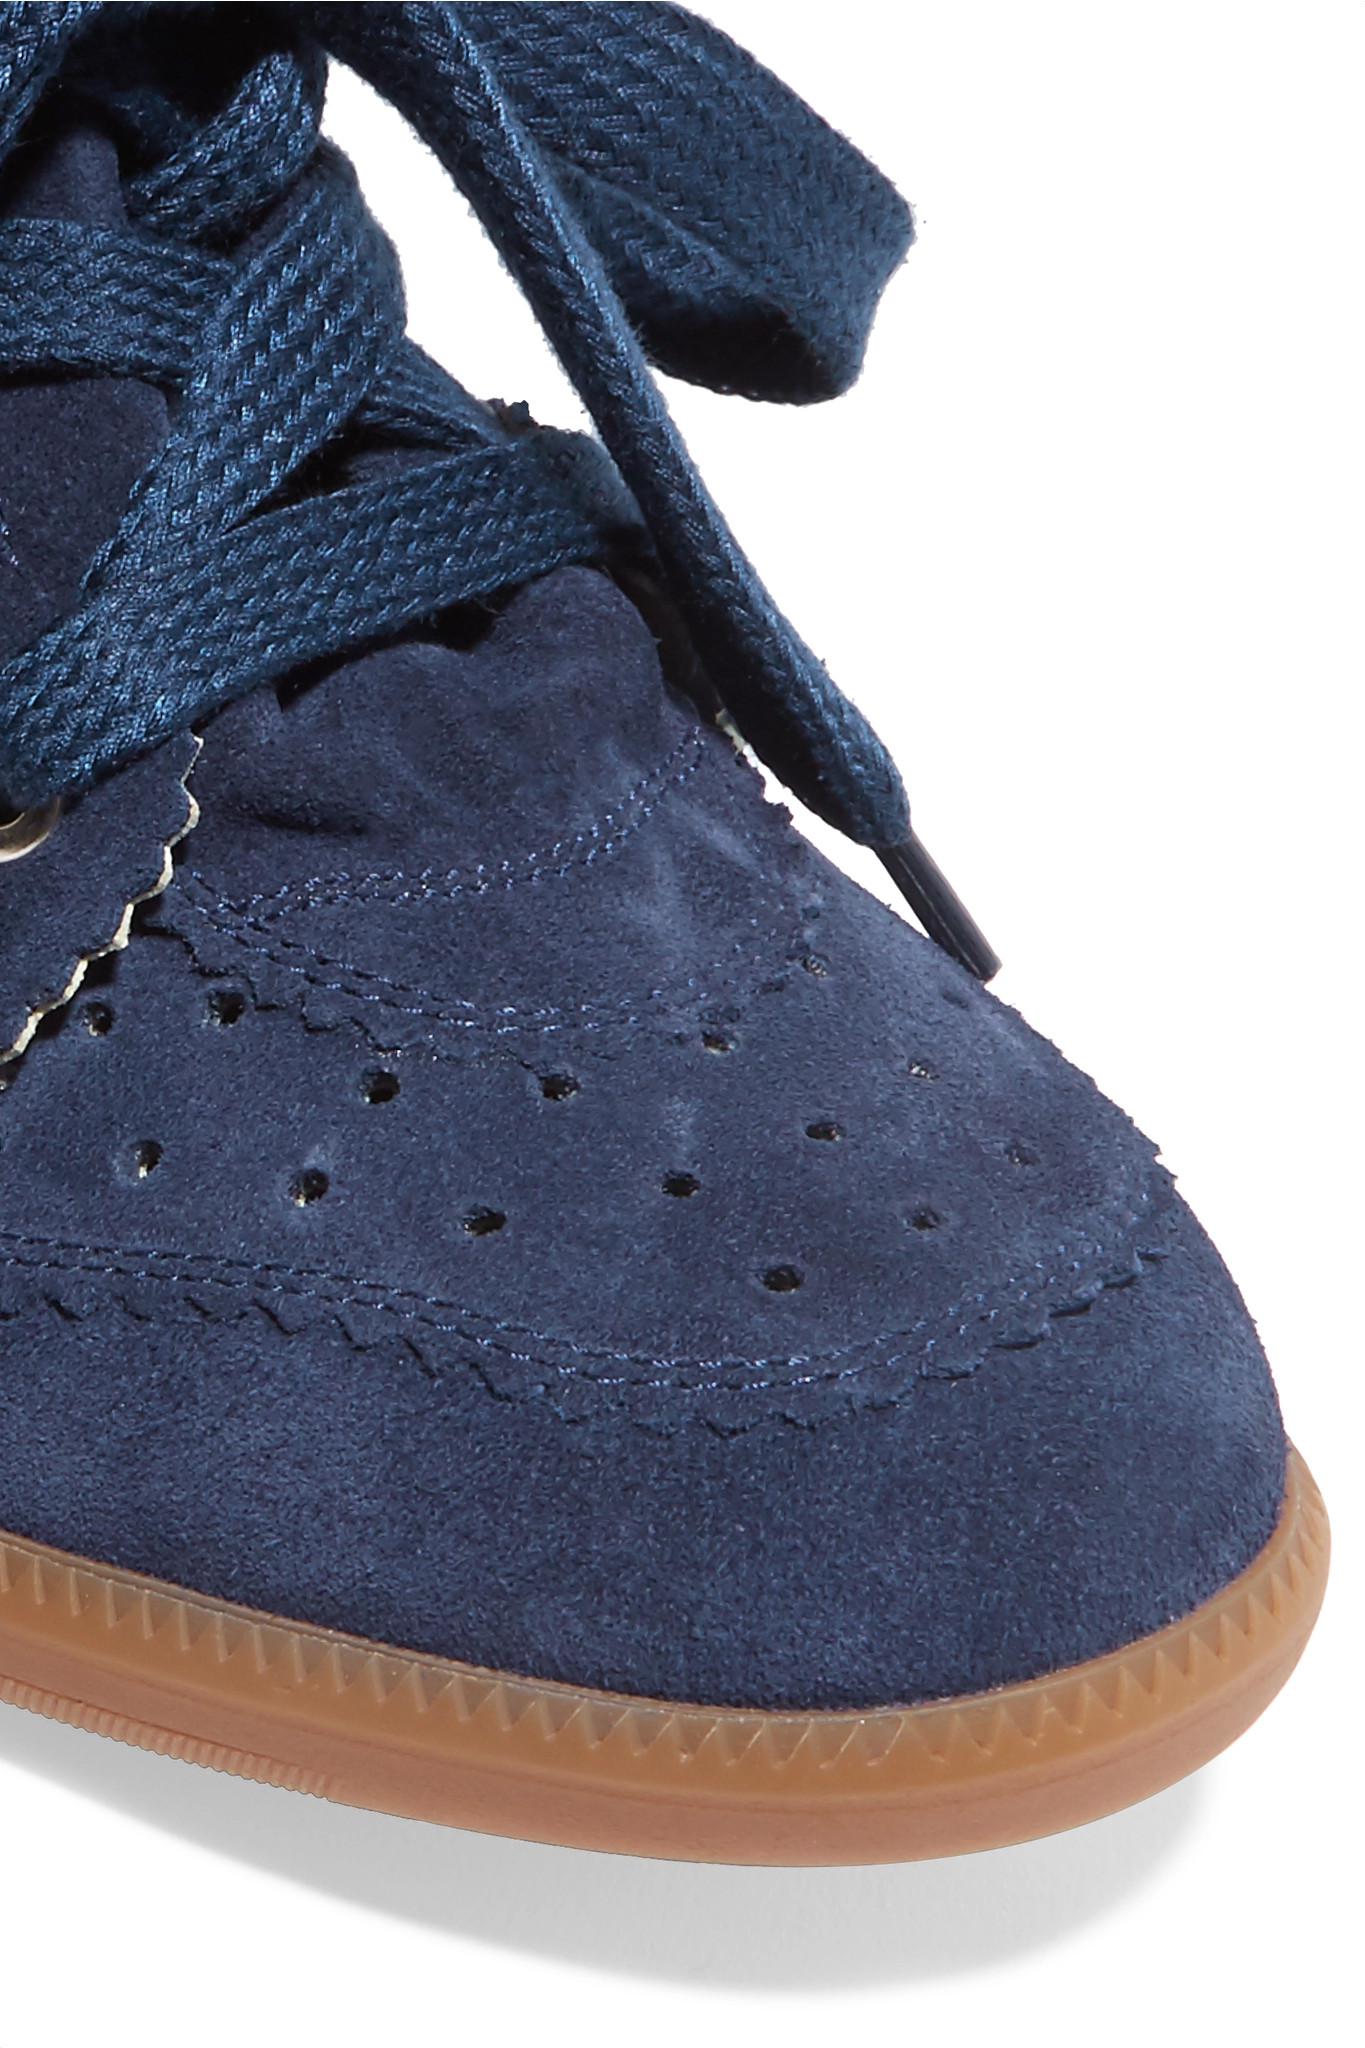 Isabel Marant Étoile Bobby Suede Wedge Sneakers in Navy (Blue) - Lyst